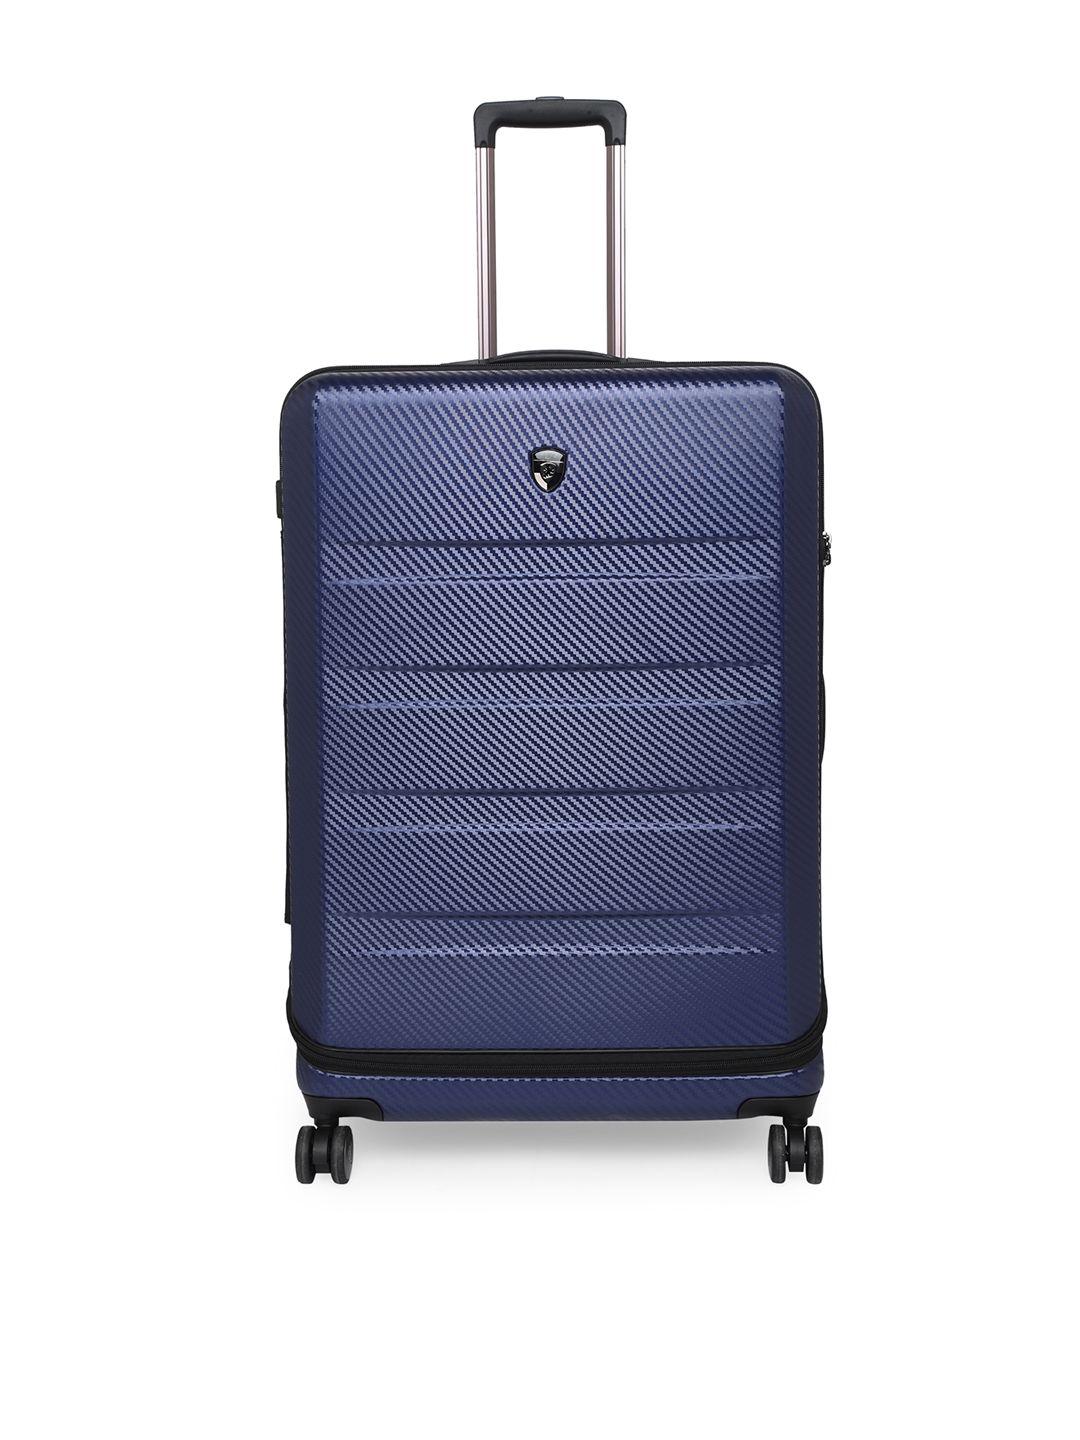 heys navy blue textured hard-sided large trolley suitcase